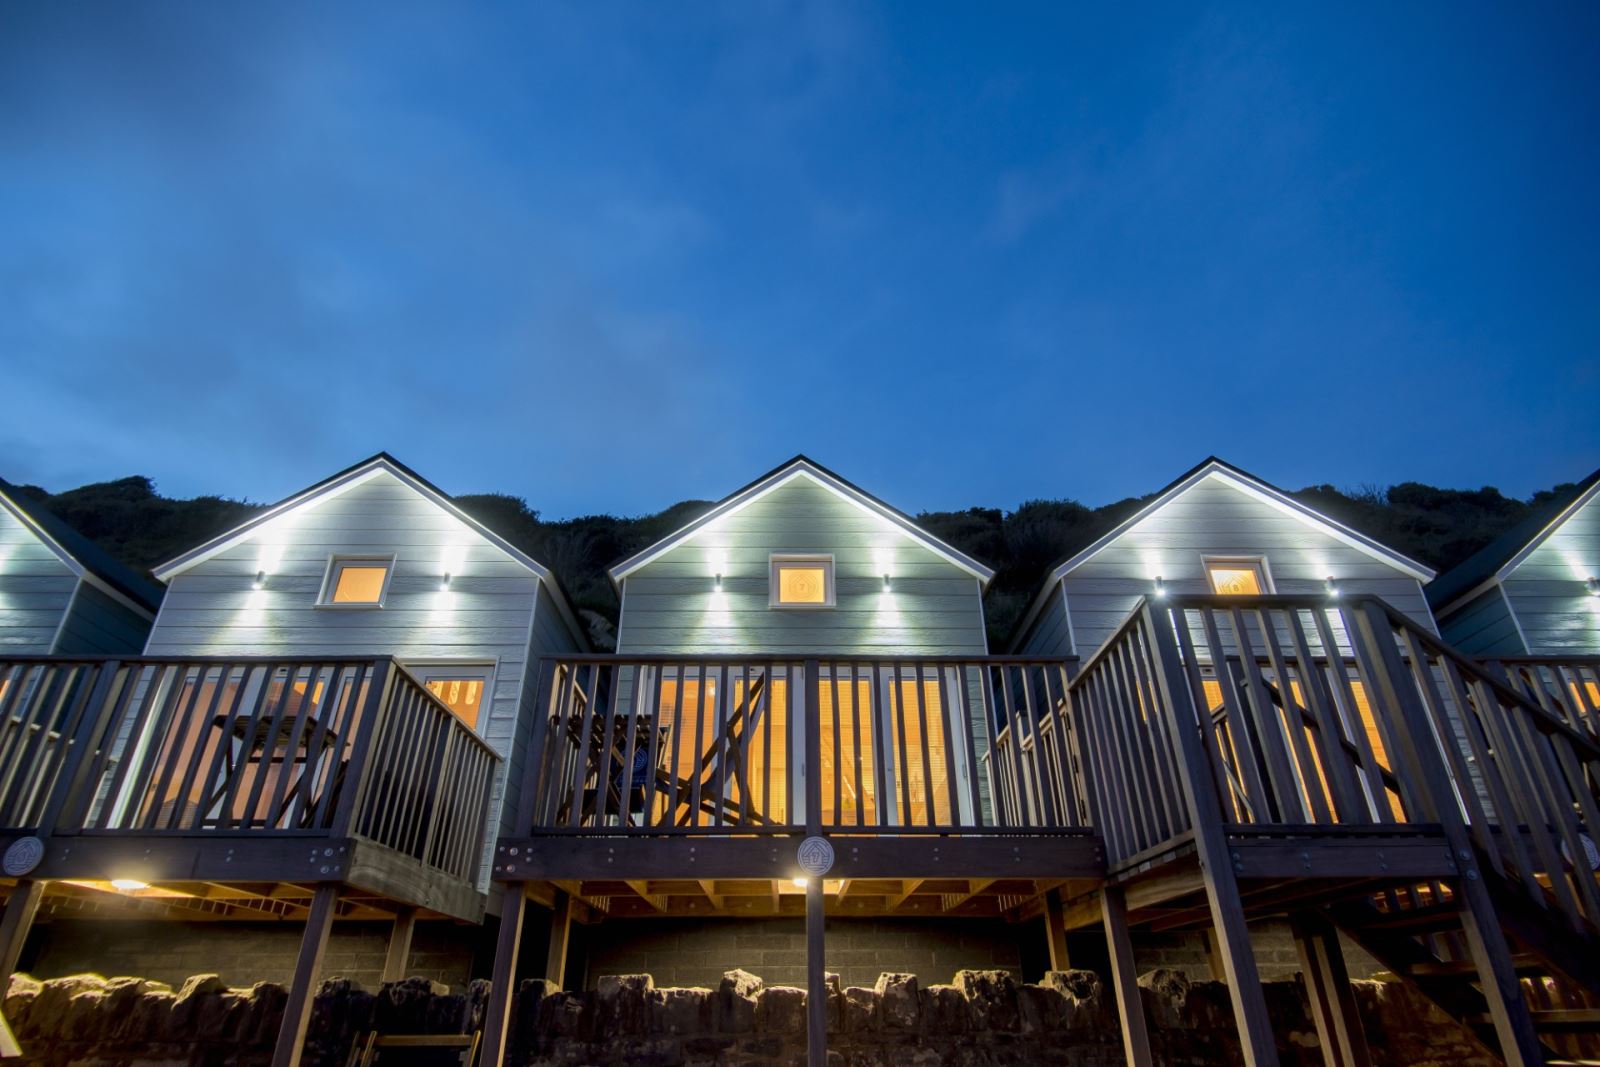 An evening view of the Bournemouth Beach Lodges, illuminated in the low Winter light.